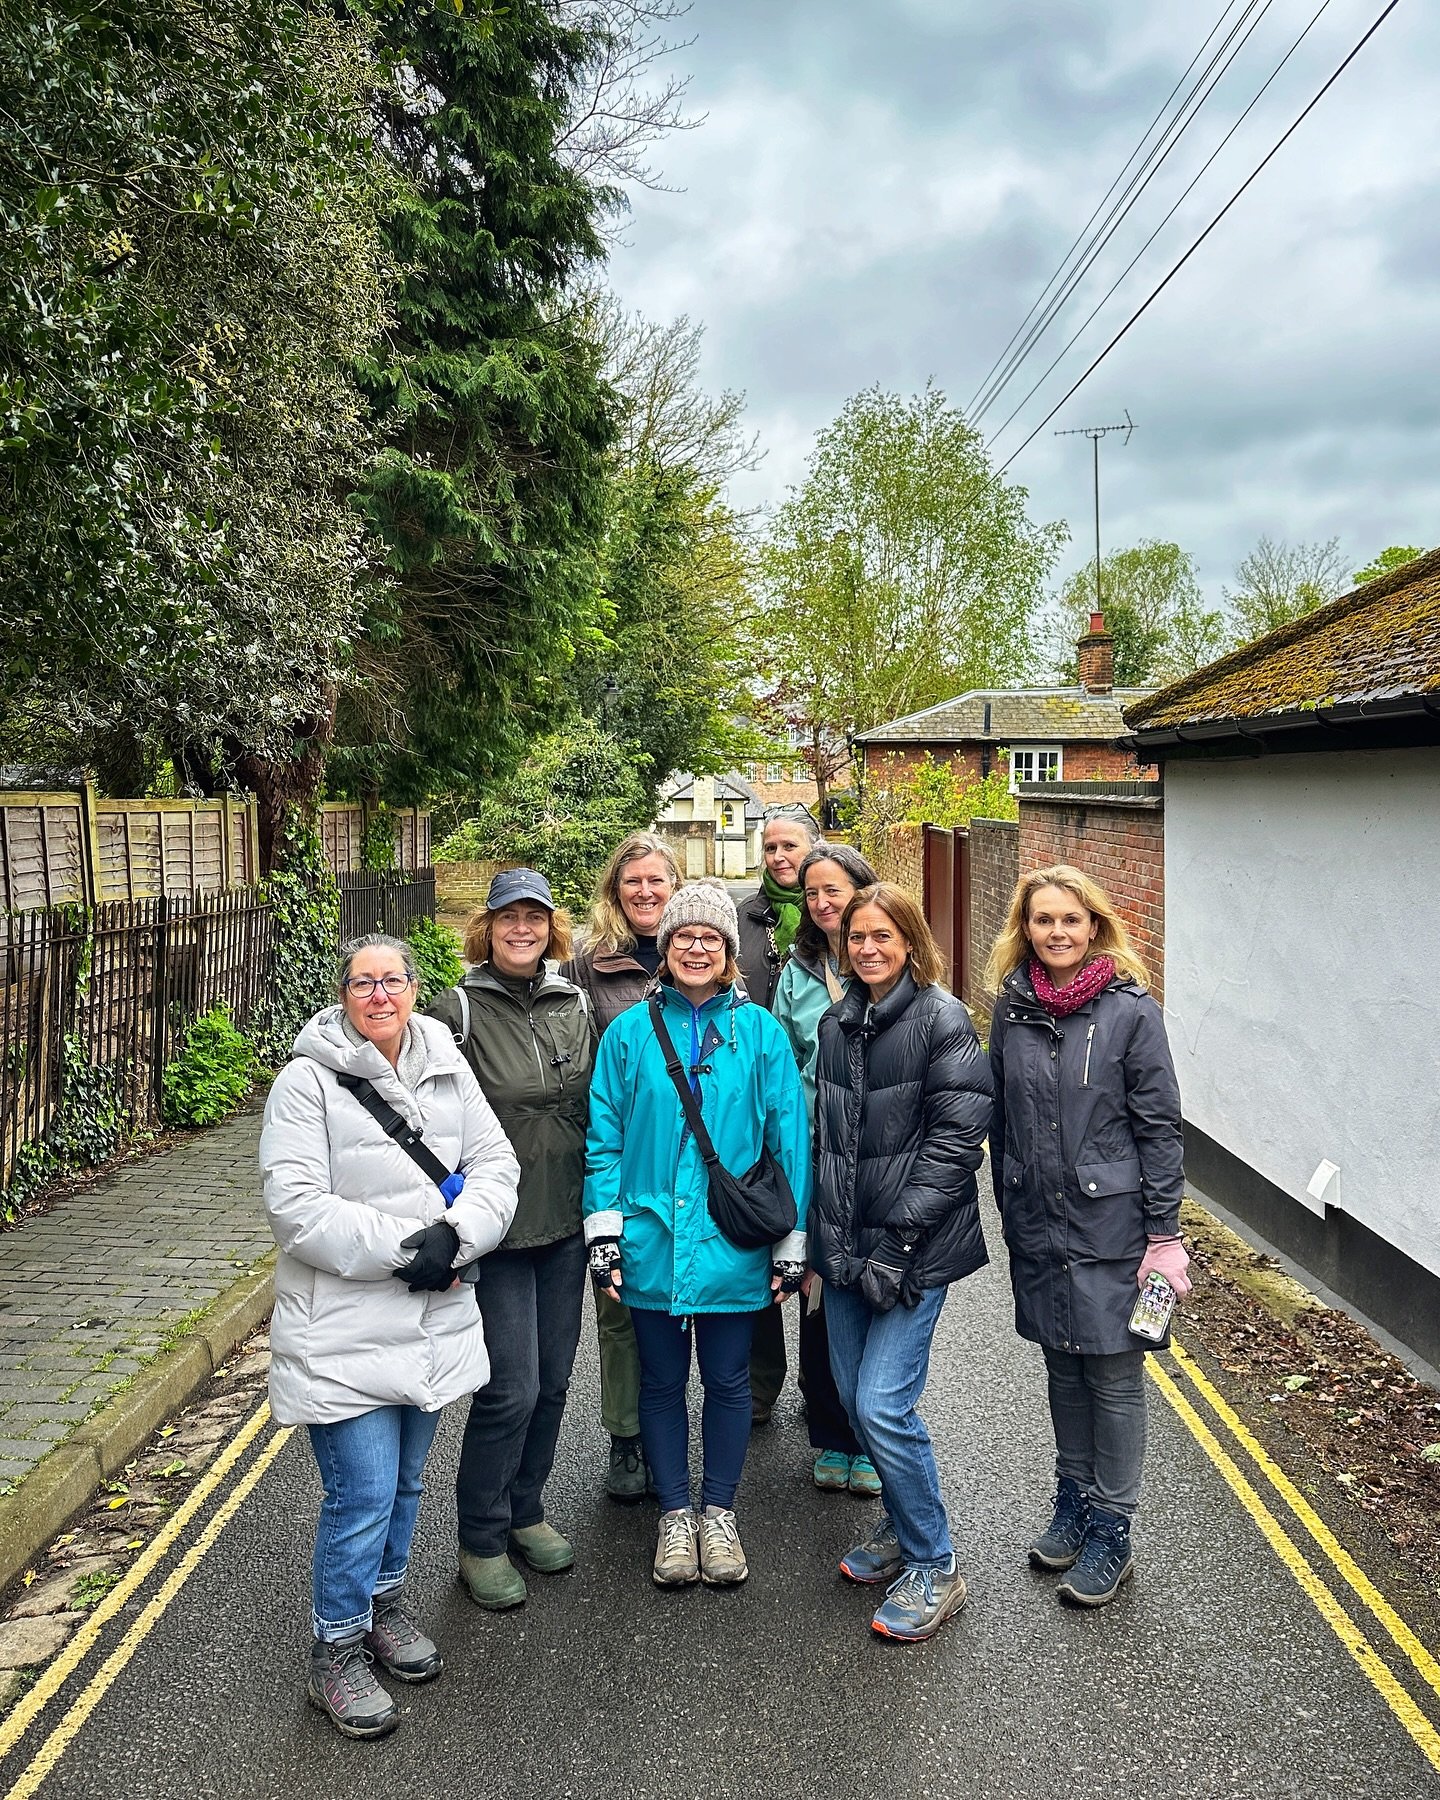 A fab St Albans Smartphone Safari with the ladies from @athenastalbans.  Thank you so much for coming along and braving the cold (just checking it is May next week right???). 

#smartphonephotography #smartphonephotographer #smartphonephotographywork